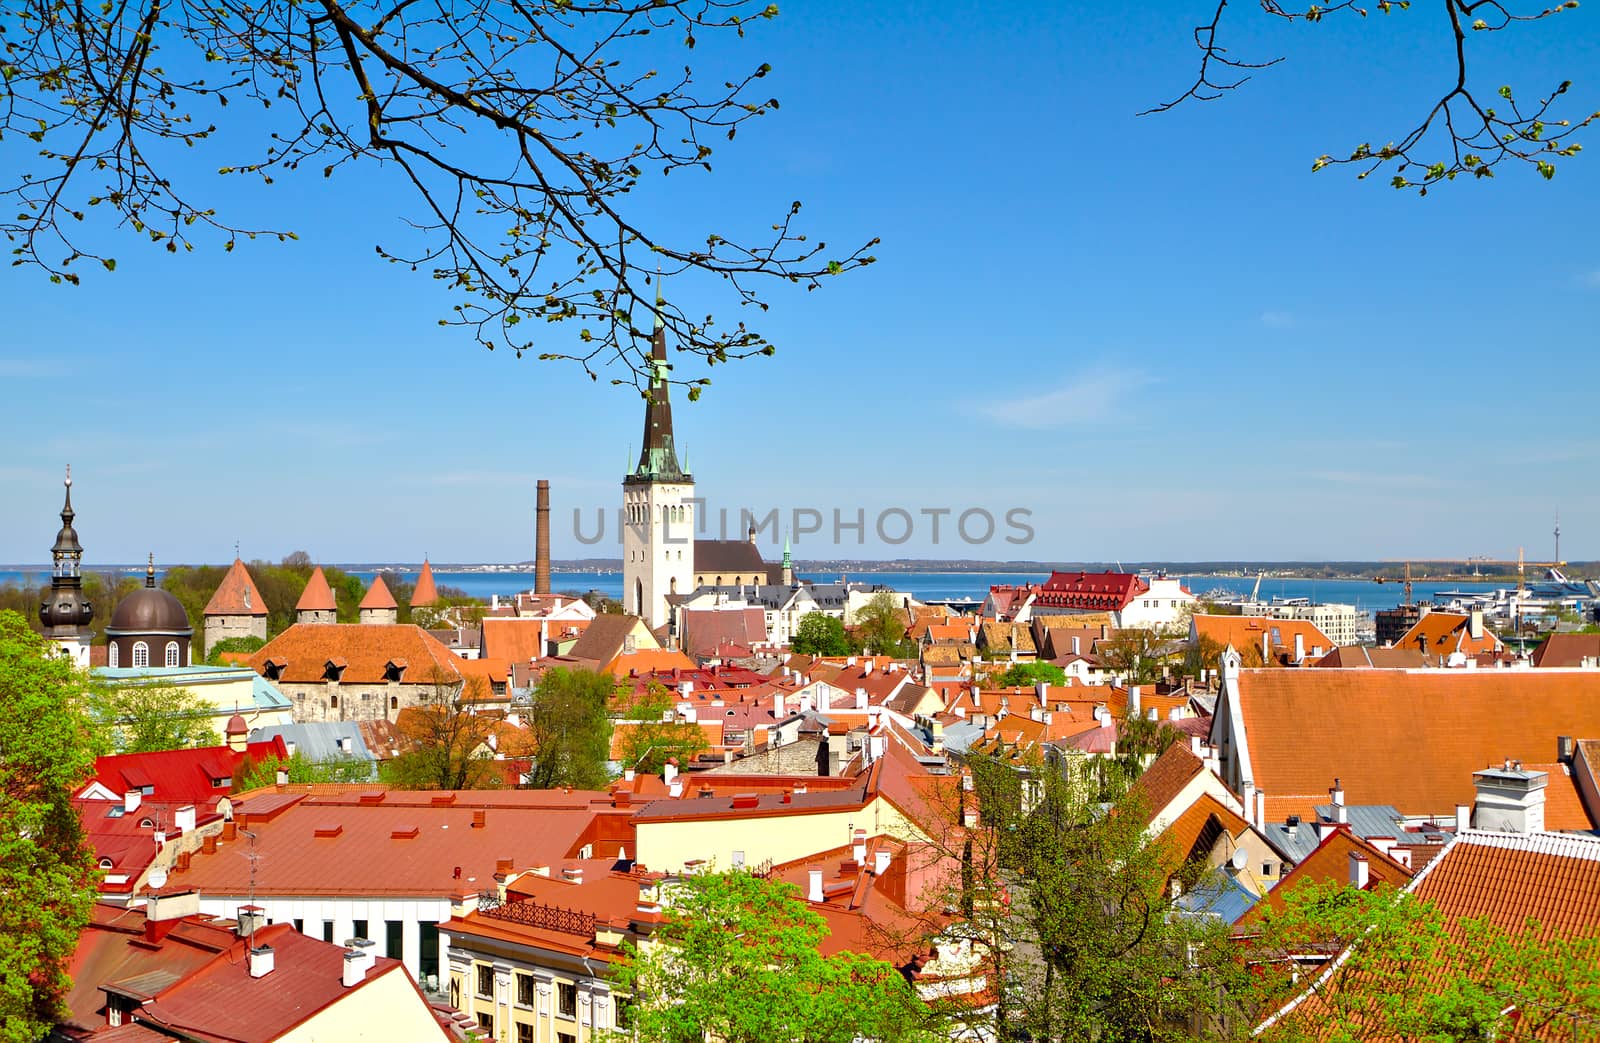 A beautiful view of the Old Town of Tallinn, Estonia. Photo taken from high ground so red rooftops and the horizon is visible.